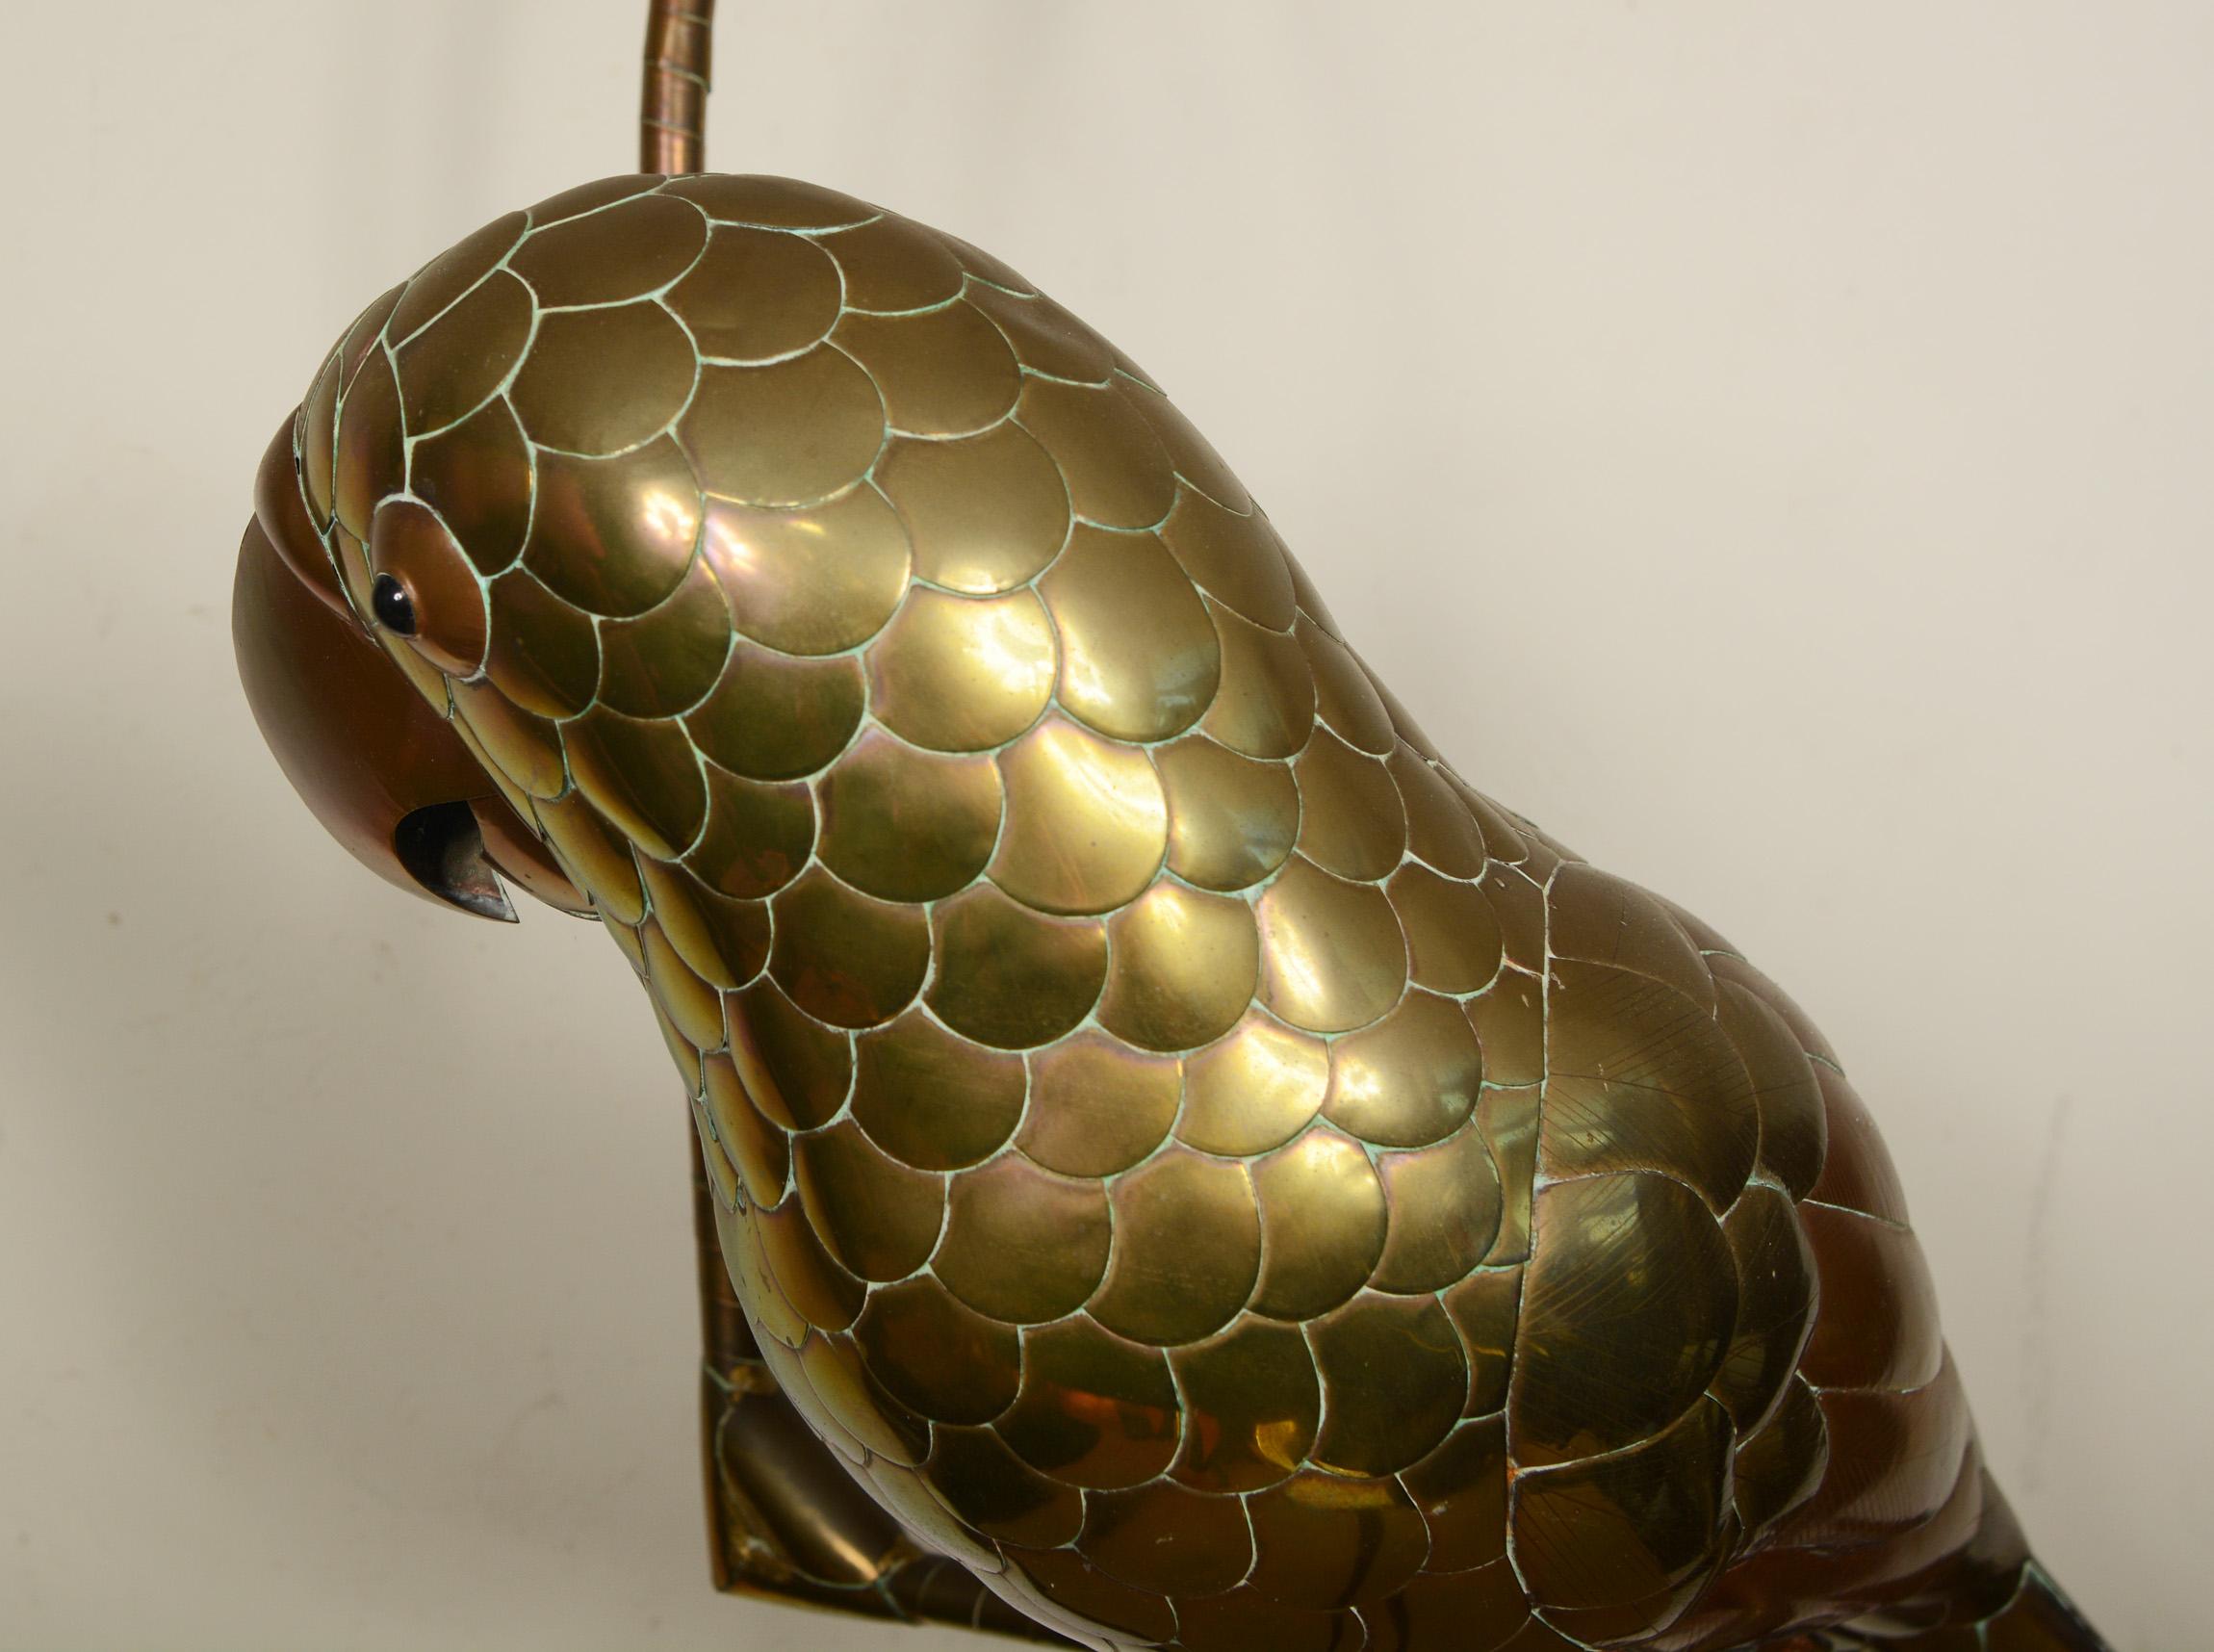 20th Century Brass and Copper Parrot Sculpture by Sergio Bustamante